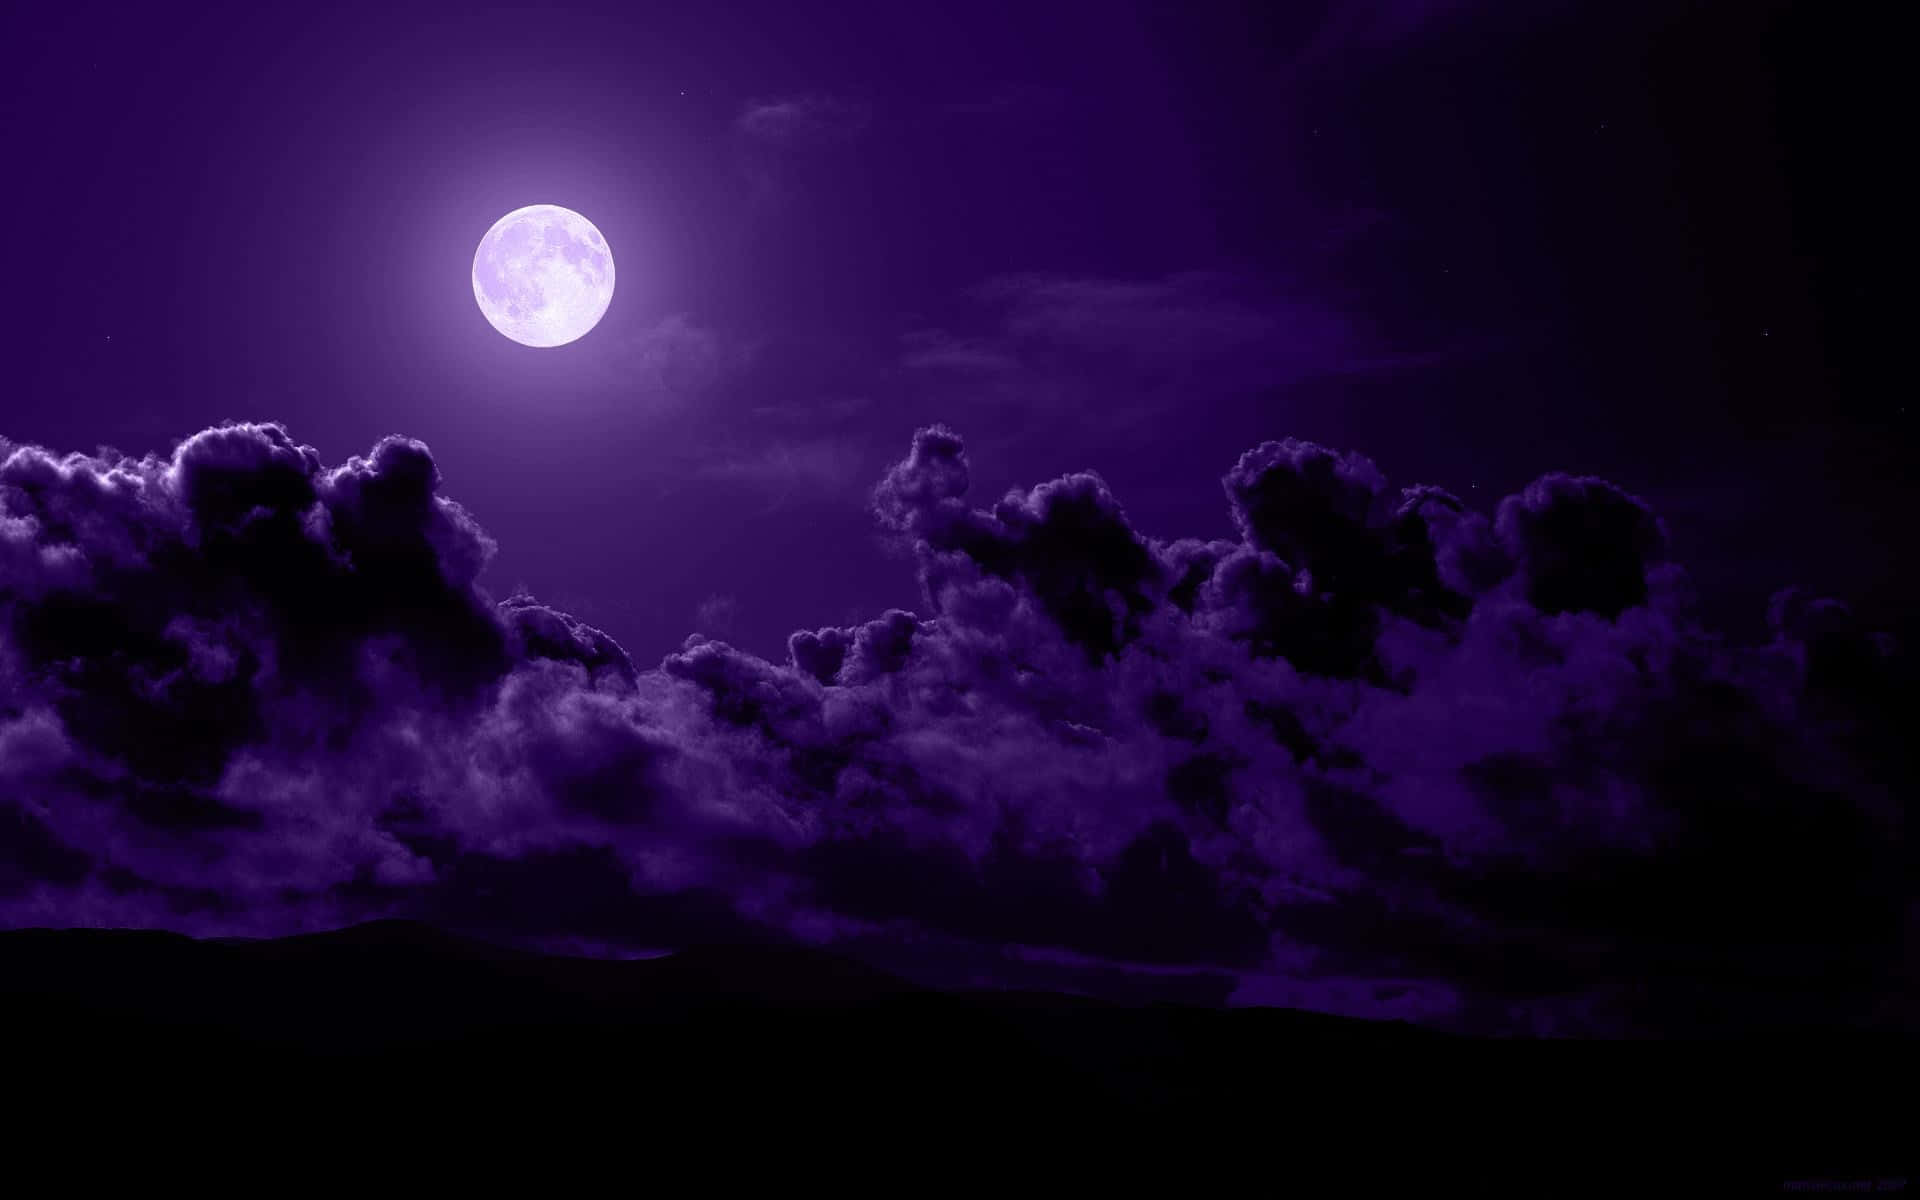 Purple Cool Cloudy Sky At Night Background